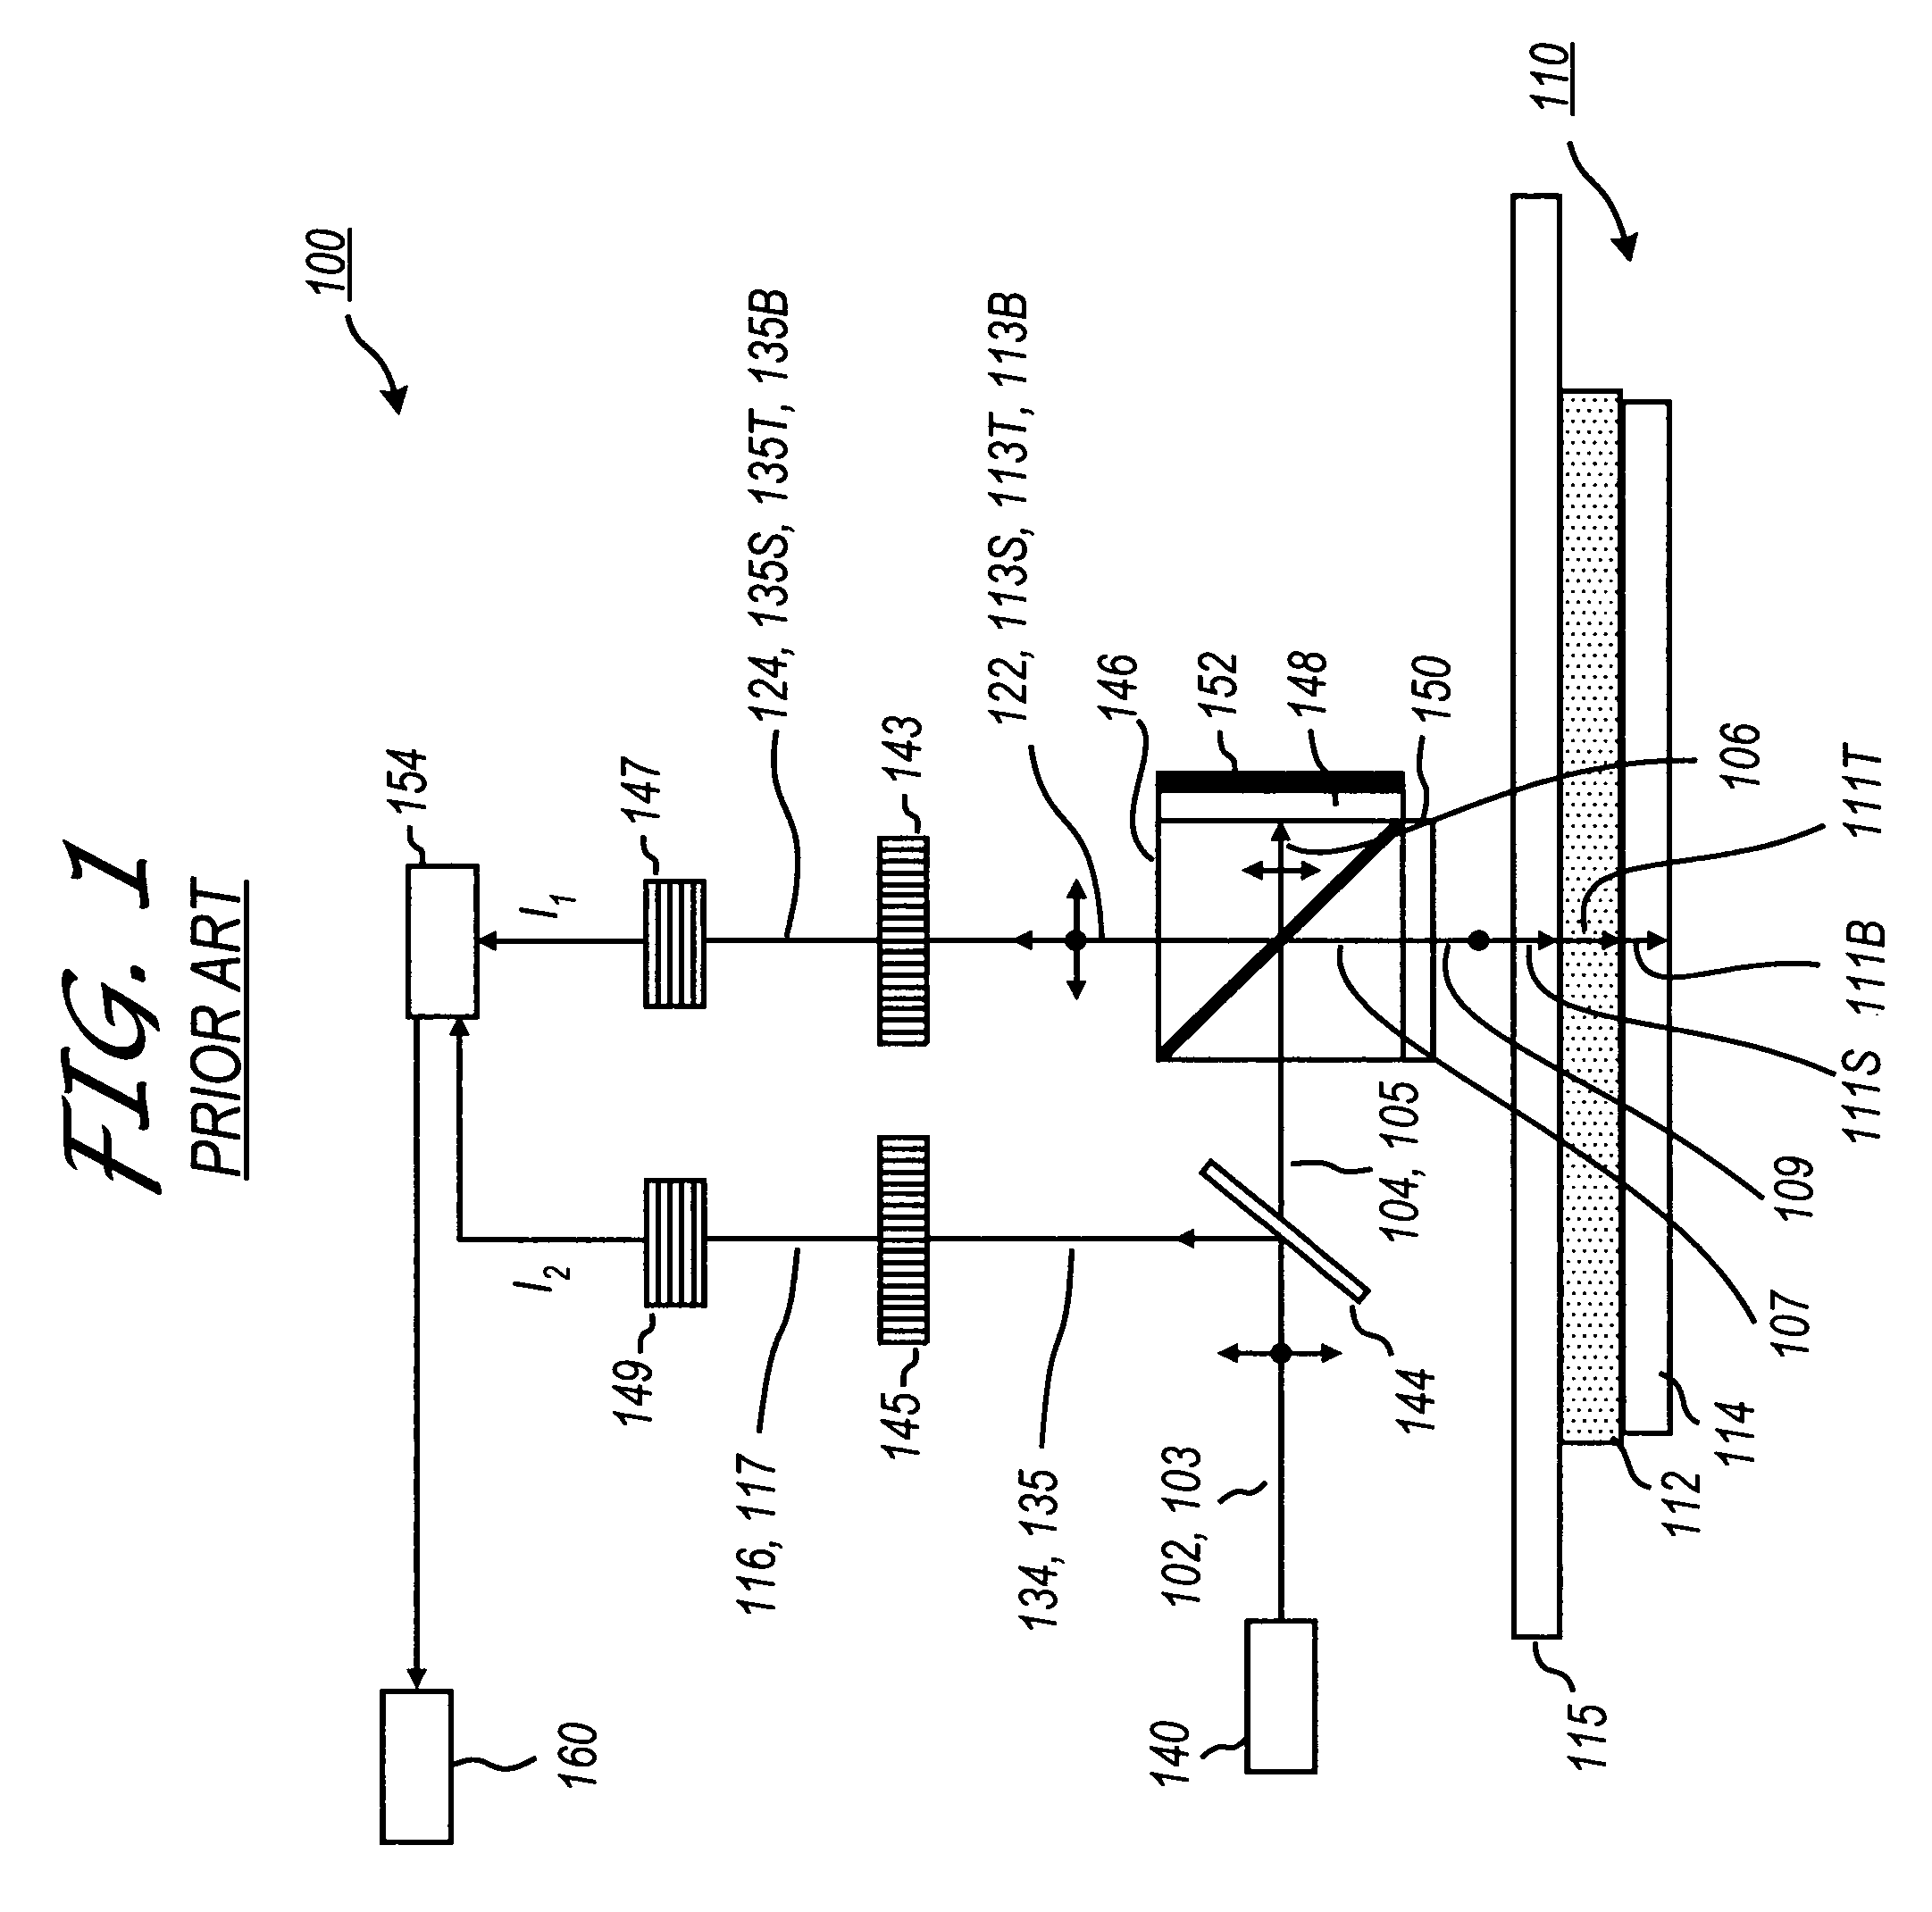 Self referencing heterodyne reflectometer and method for implementing